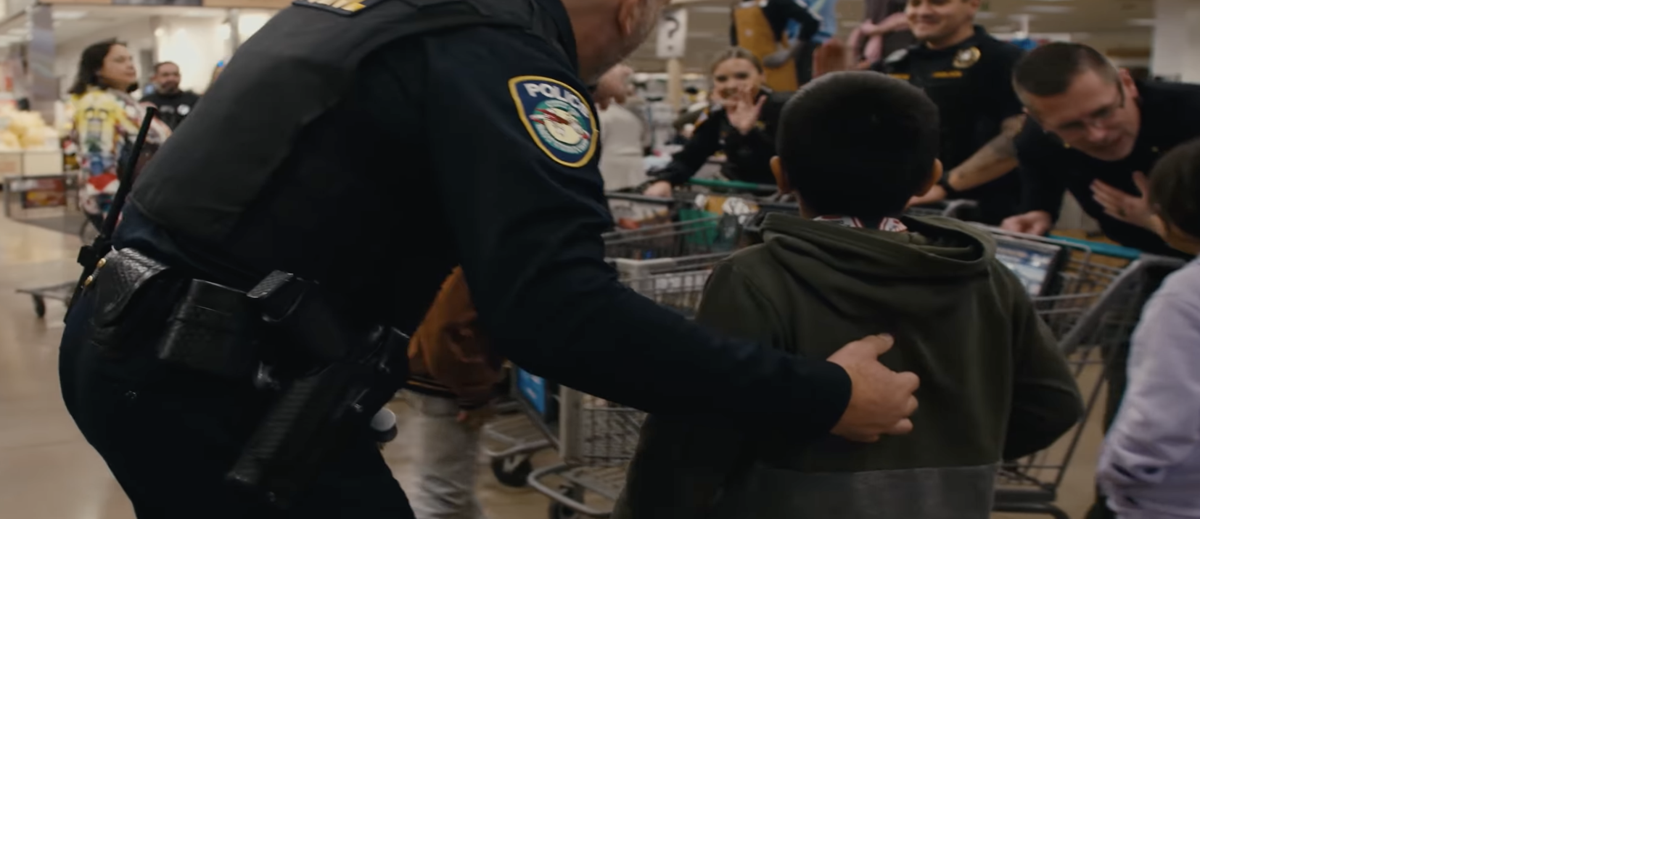 Shop-With-A-Cop gifts hundreds of kids via local agencies, Columbia Basin